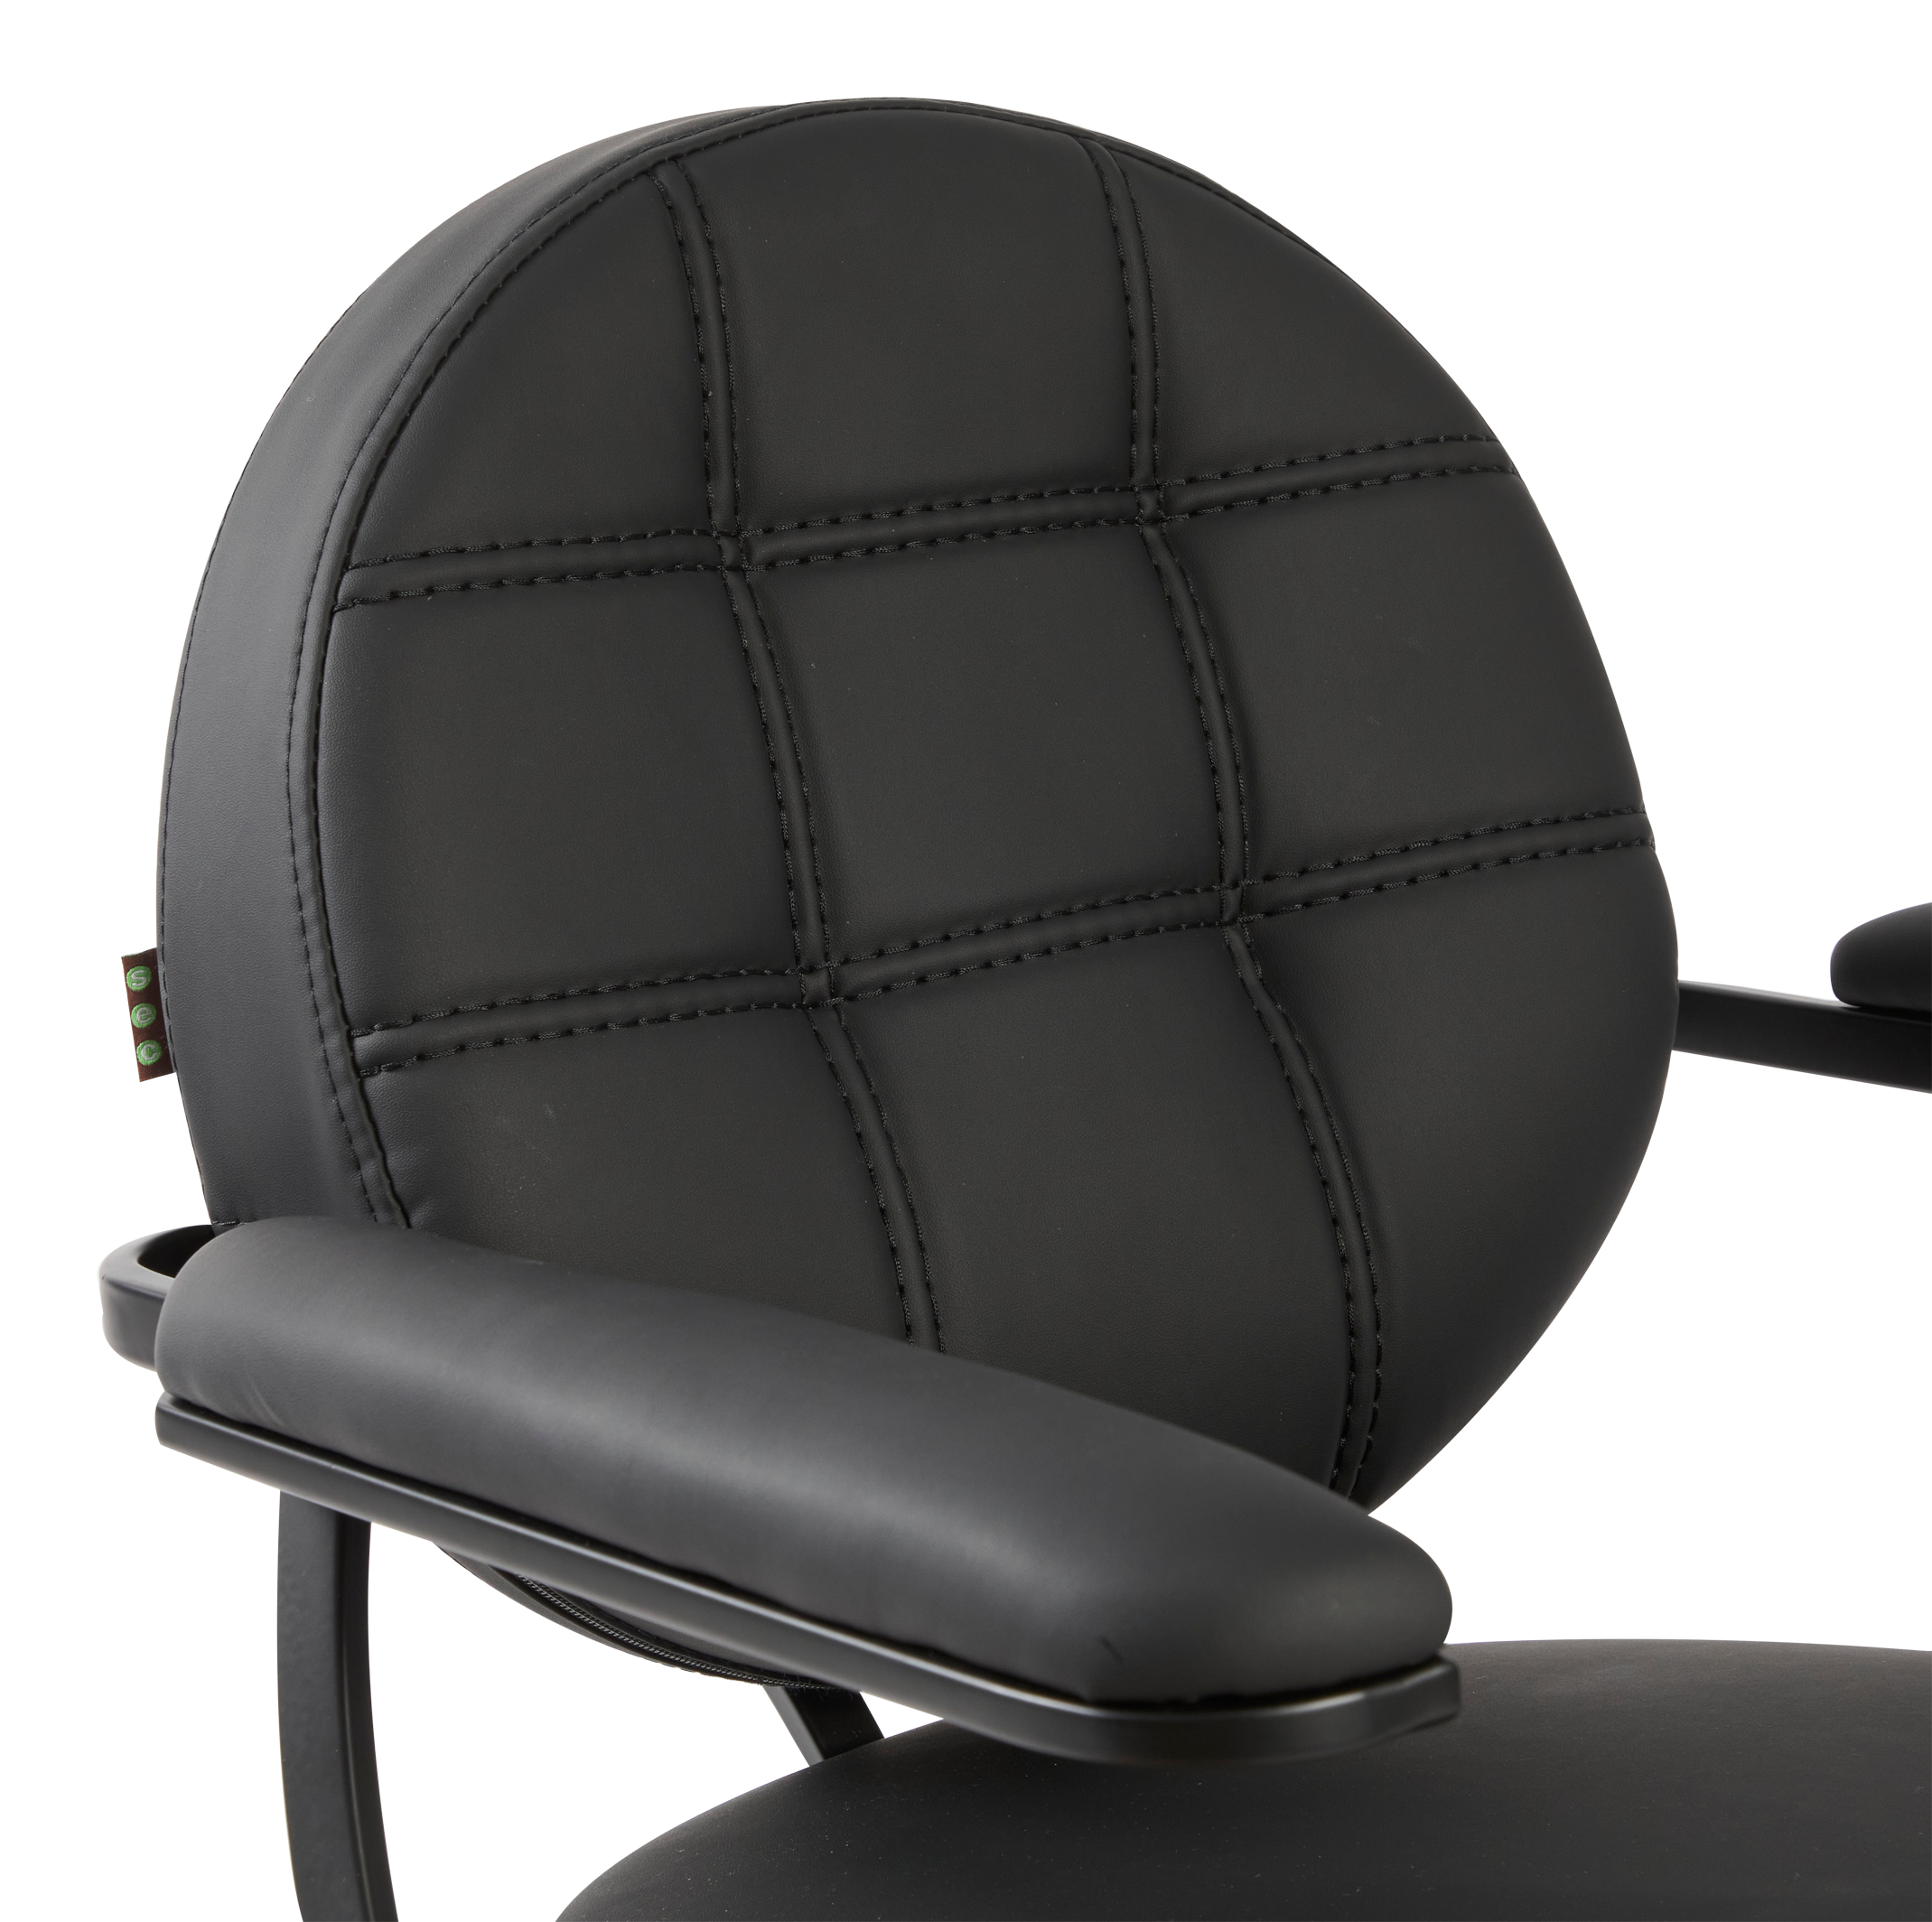 The Tulip Salon Styling Chair - Midnight Black by SEC